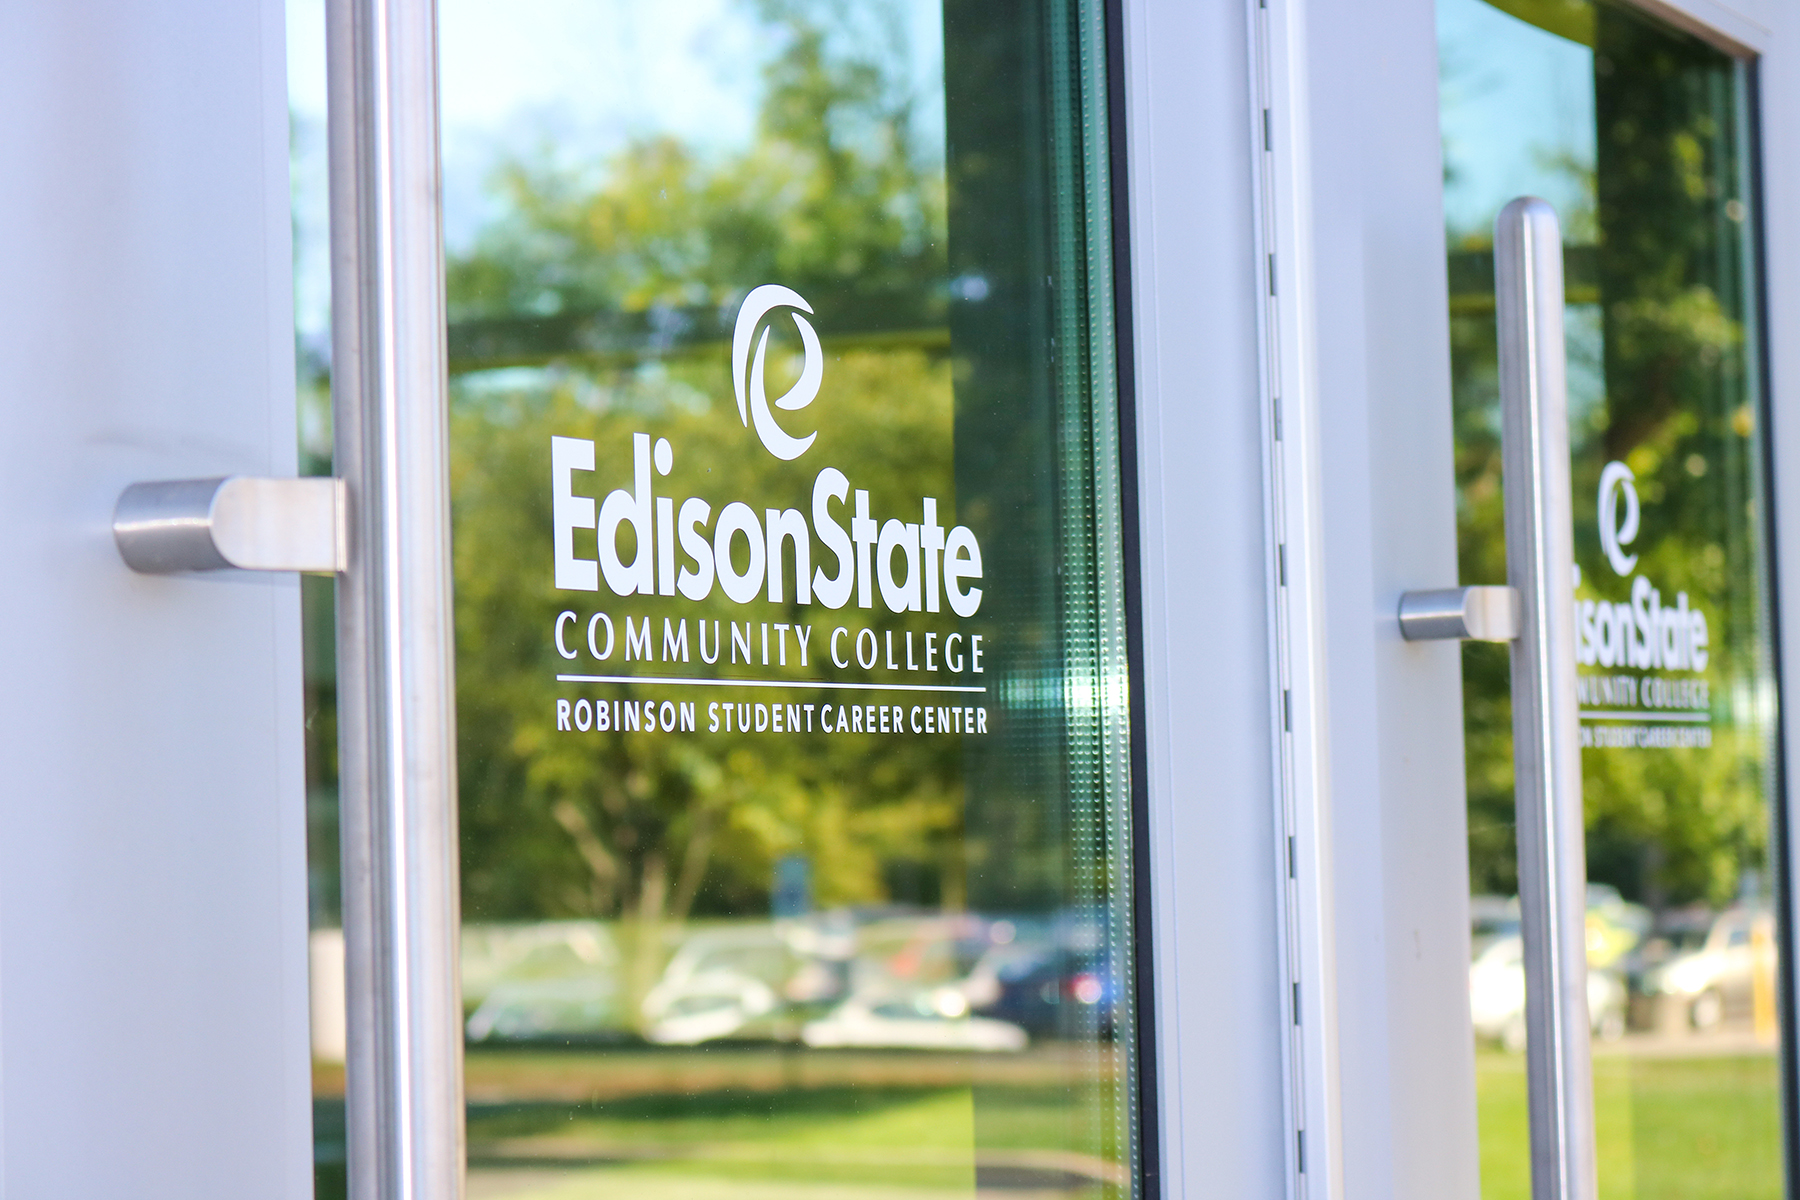 Doors to the Robsinson Student Career Center at Edison State Community College